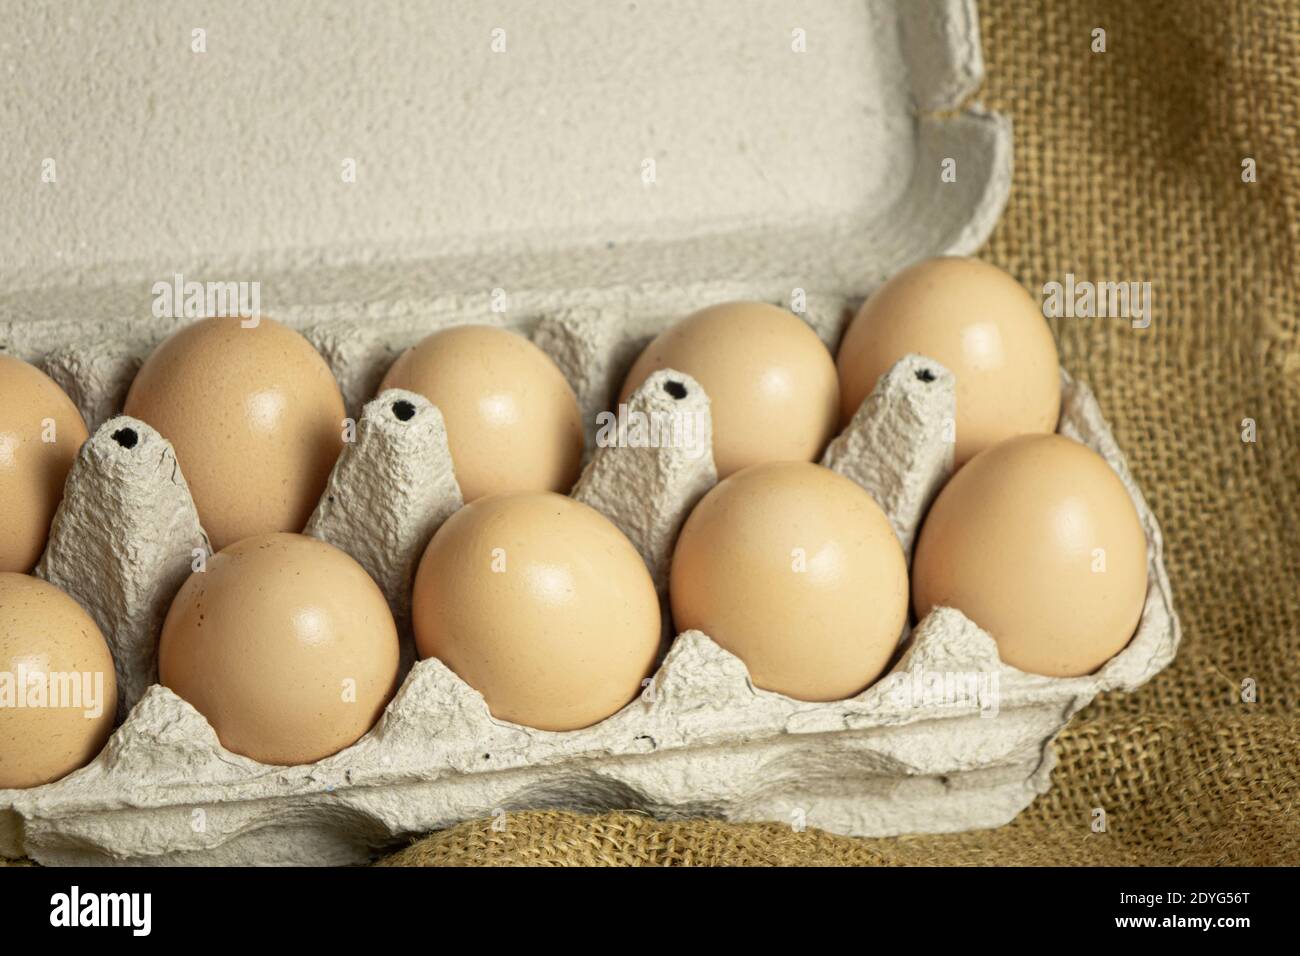 paper box with farm fresh chicken eggs on sackcloth background Stock Photo